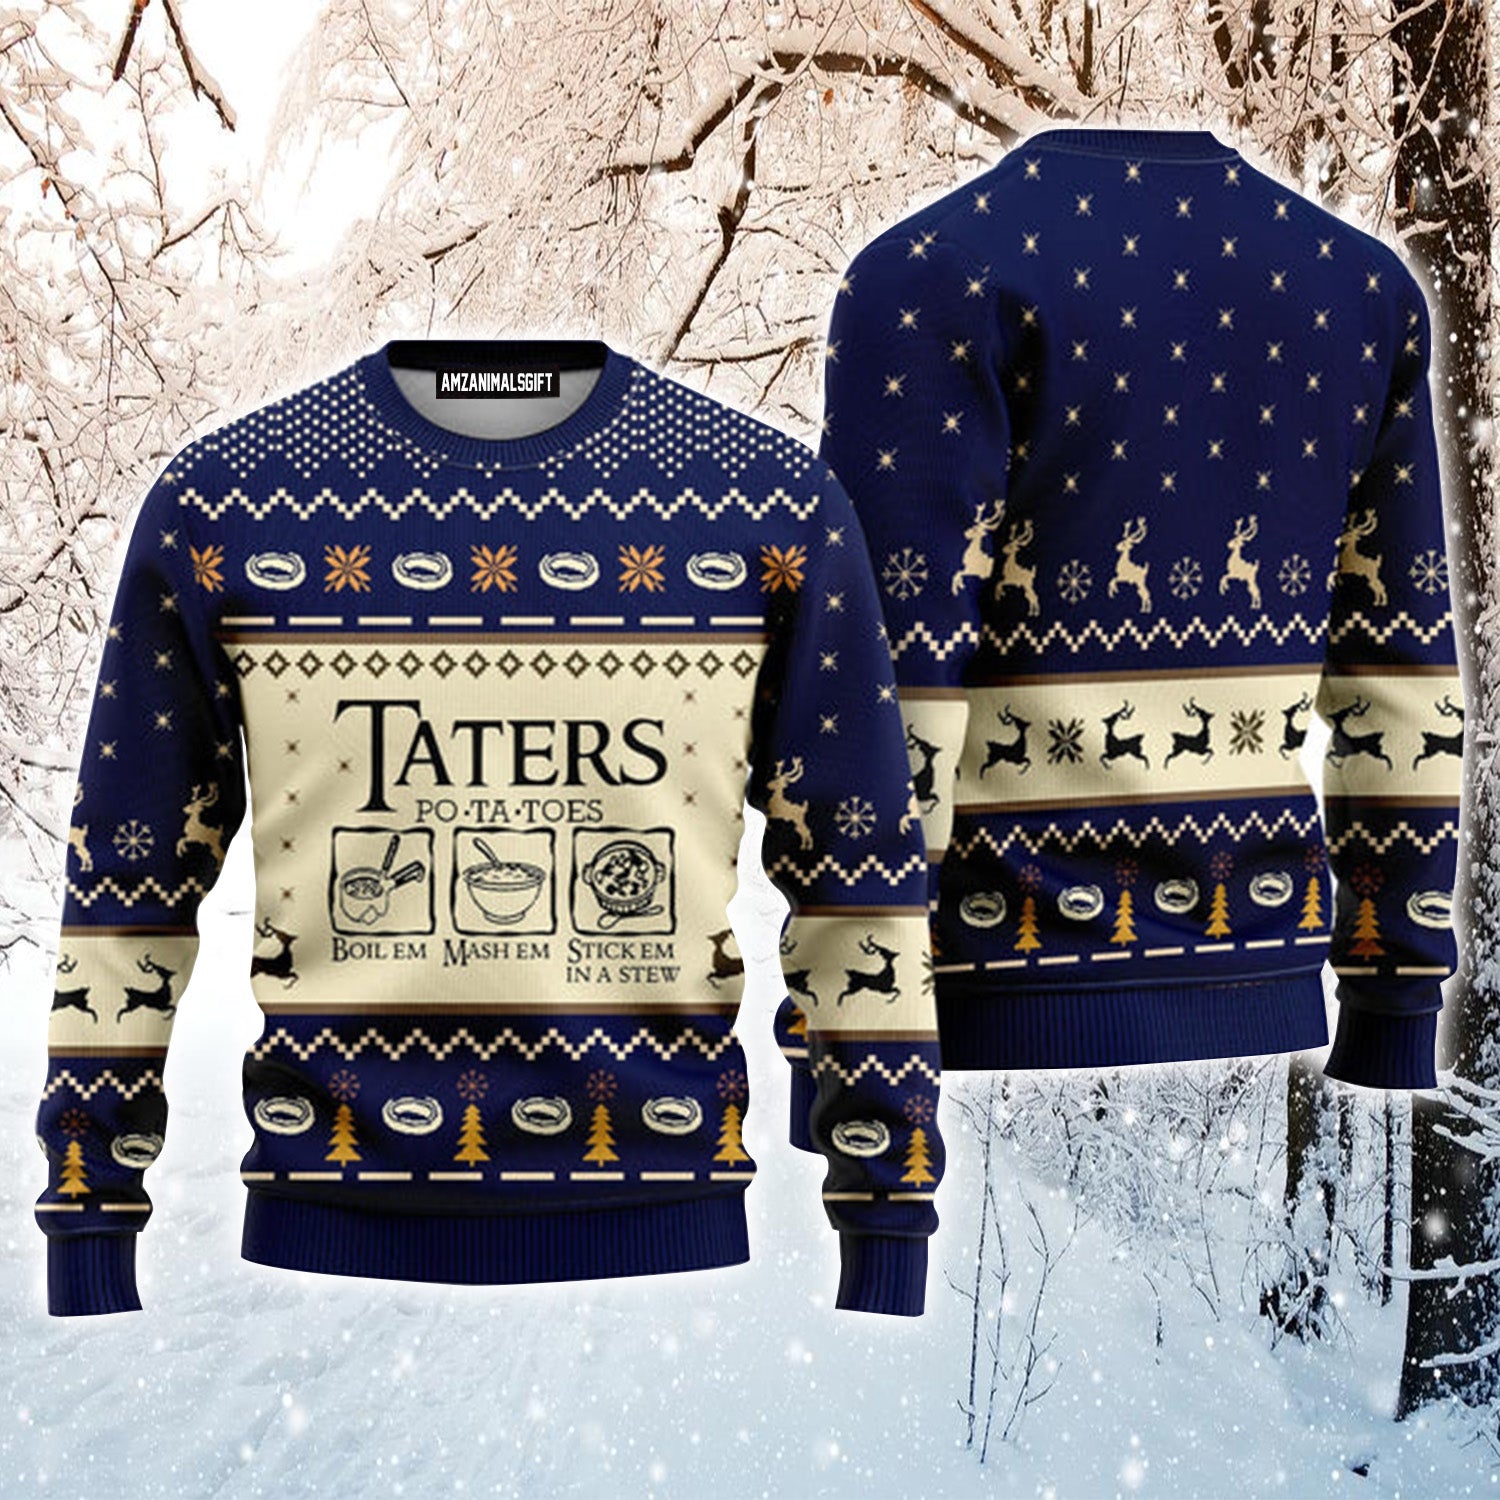 LOTR Christmas Potatoes Taters Blue Urly Christmas Sweater, Christmas Sweater For Men & Women - Perfect Gift For Christmas, Family, Friends